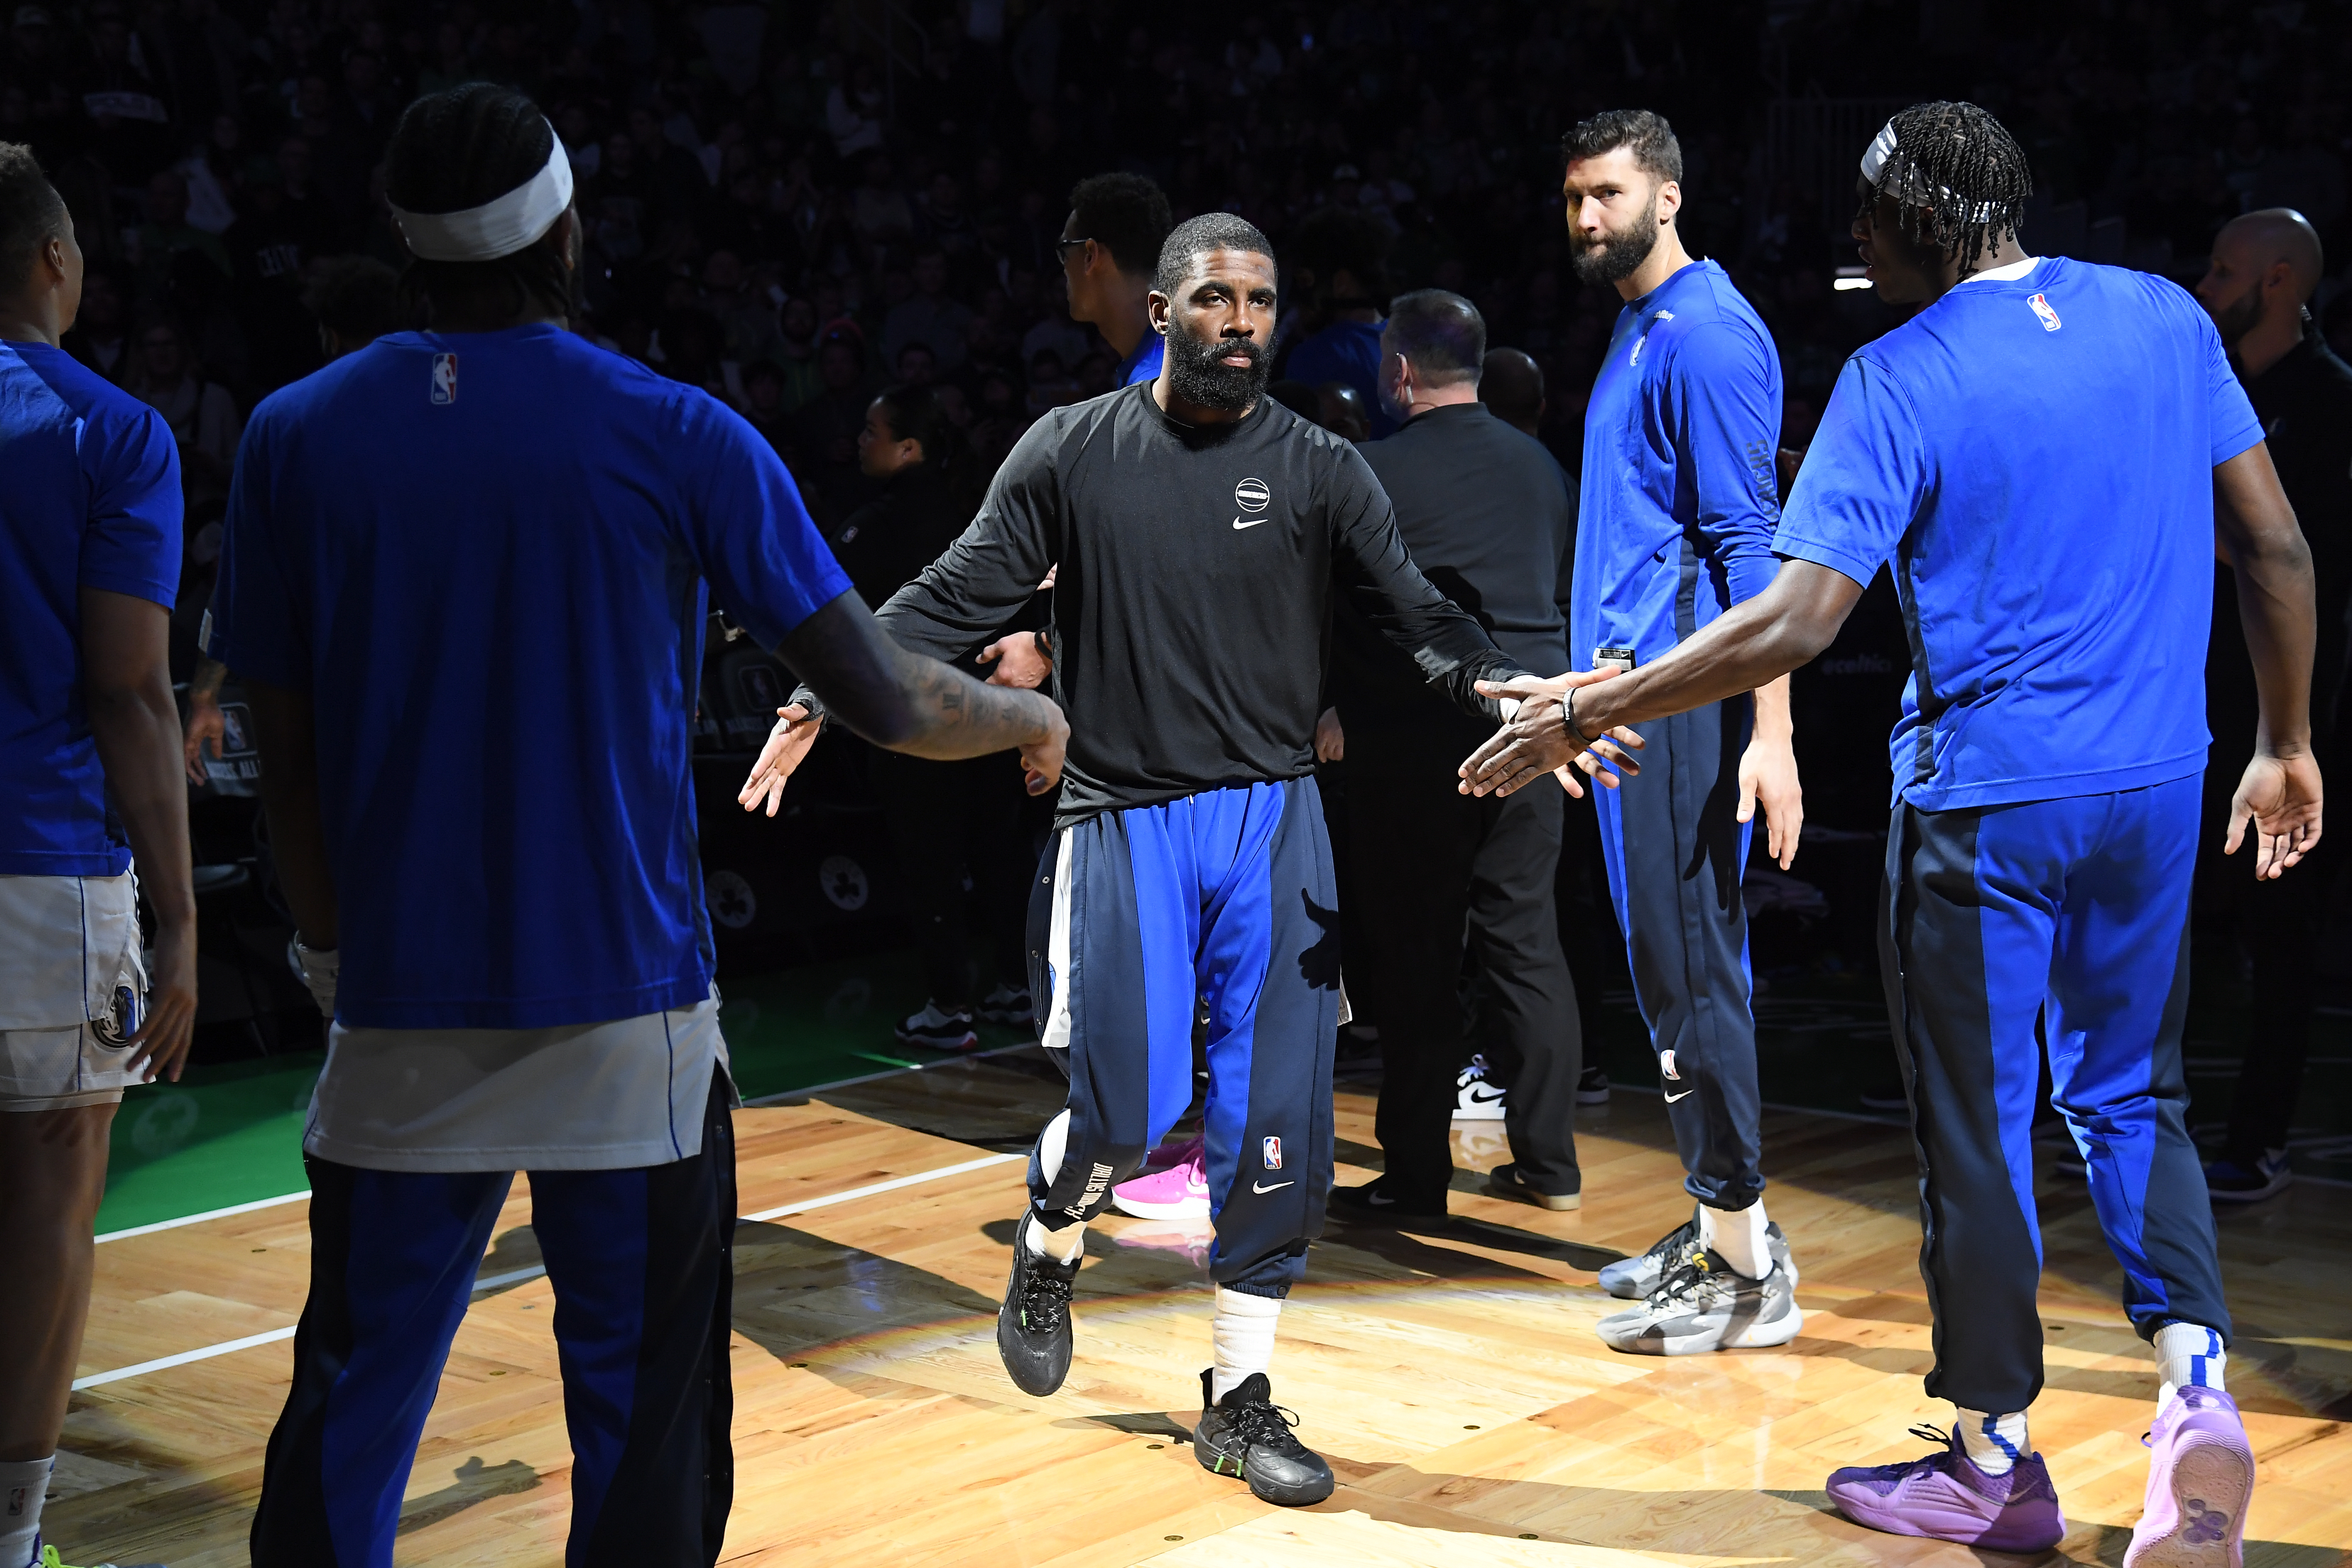 Dallas Mavericks guard Kyrie Irving is introduced ahead of a game against the Boston Celtics.